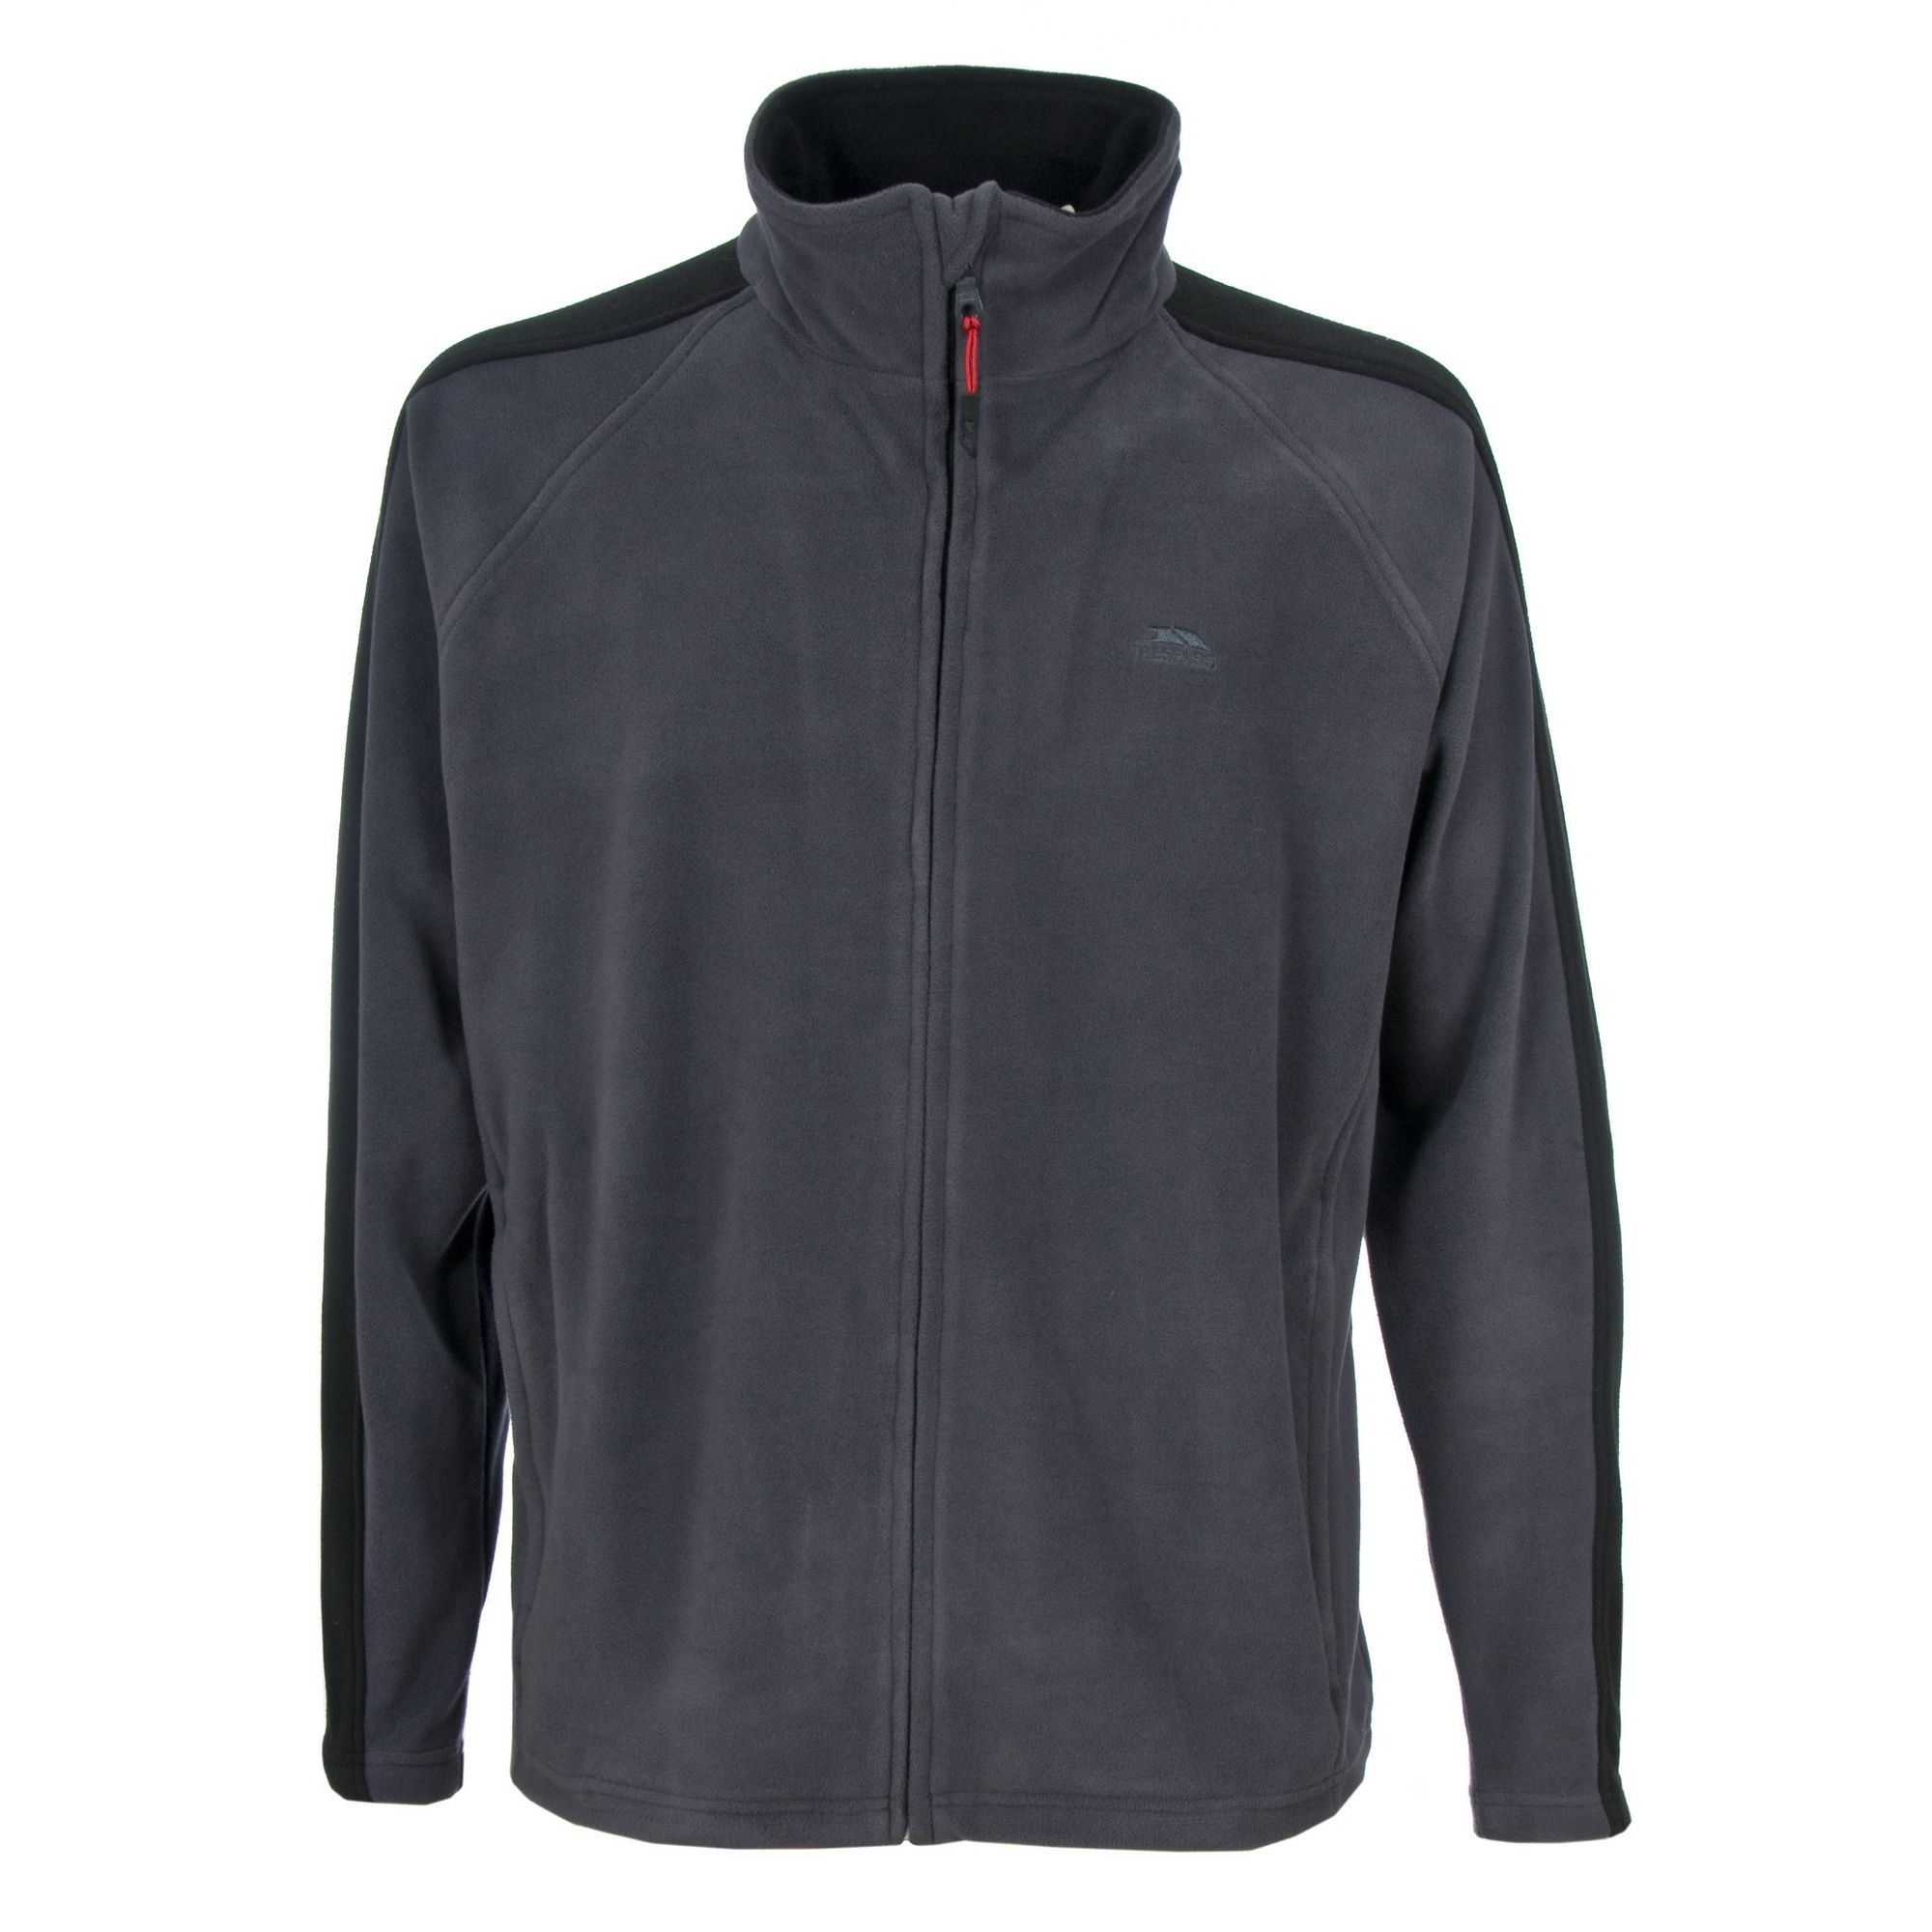 Mens fleece jacket. 300gsm Airtrap fleece build to trap and hold onto body heat. Sueded fleece. Full front zip. 2 zip pockets. Drawcord at hem. Anti-pill fleece build. 100% Polyester.